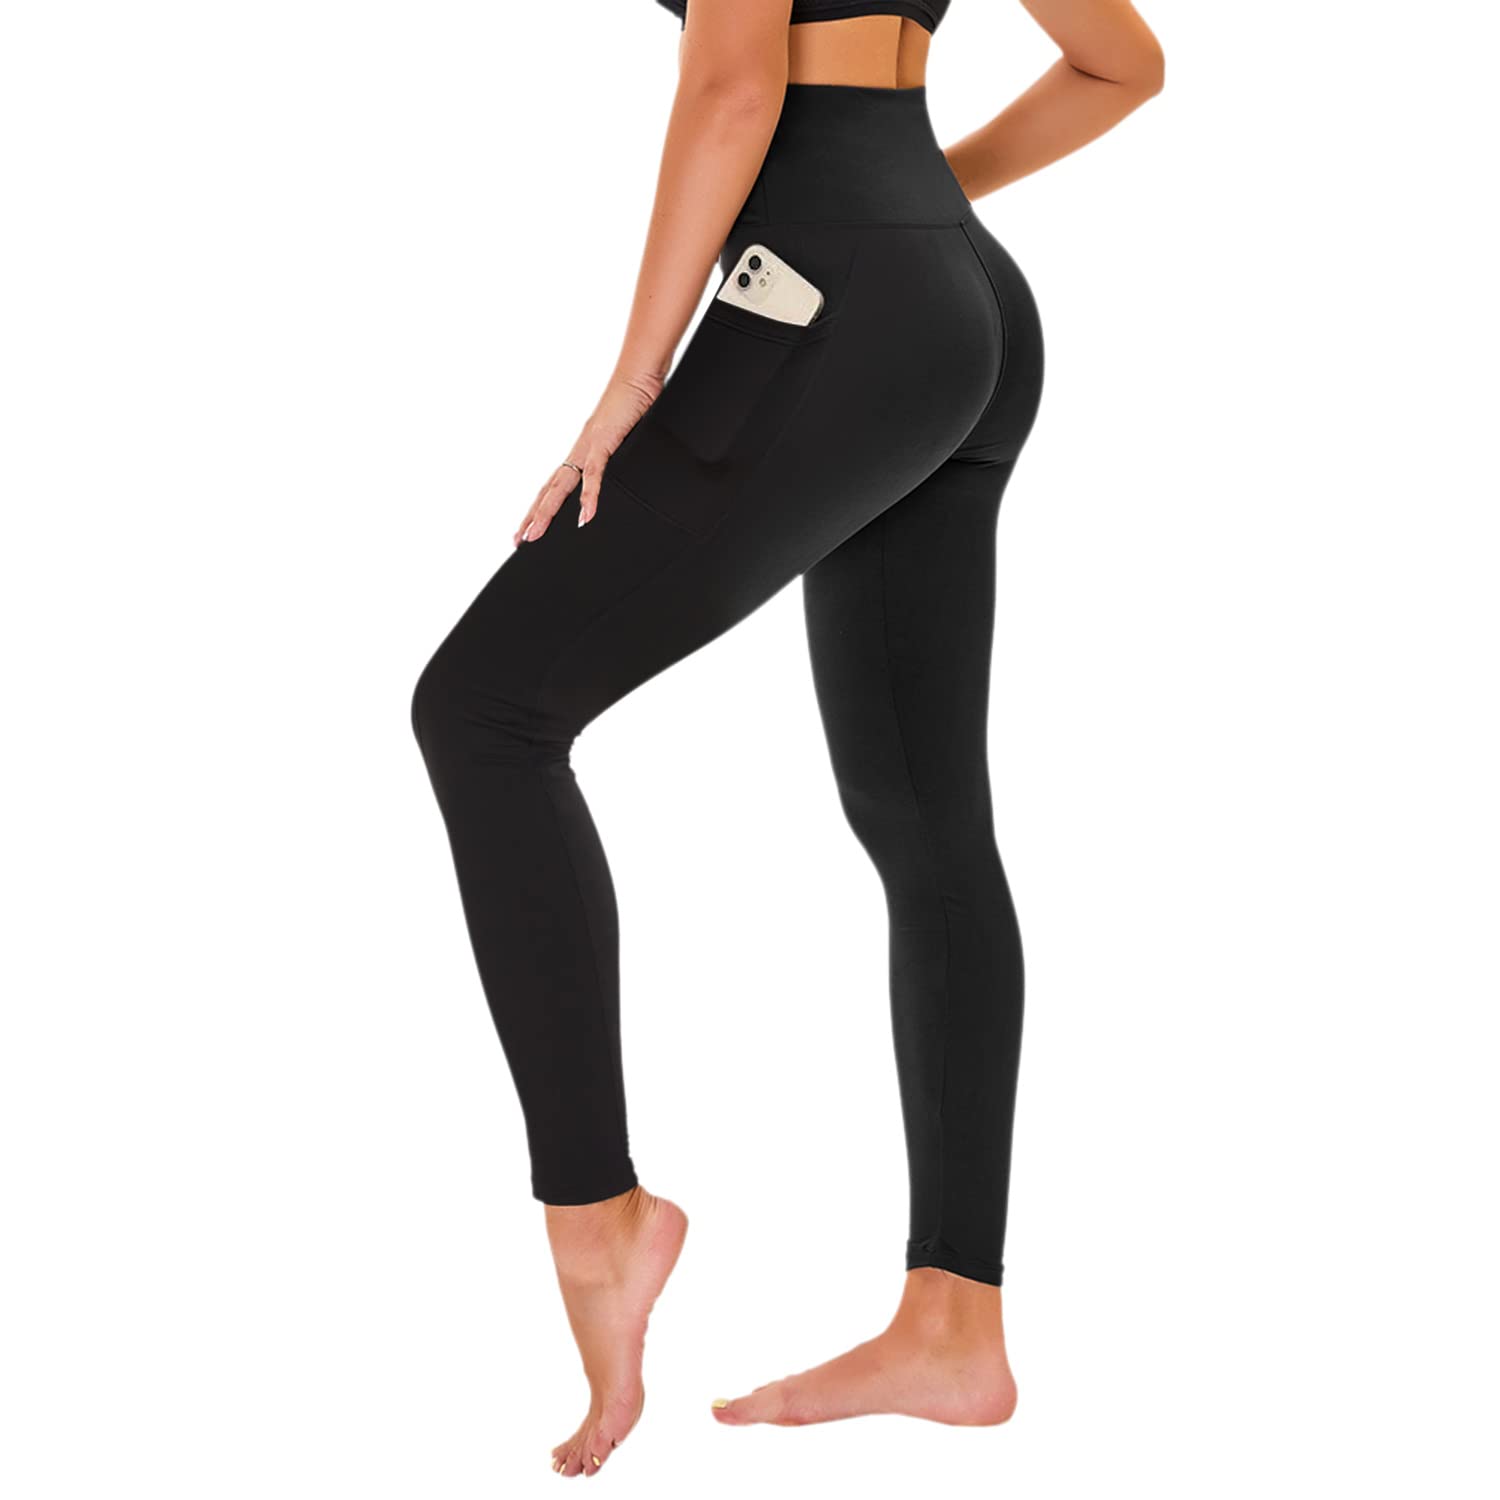  TNNZEET Capri Leggings for Women - Tummy Control Black Leggings  with Pockets High Waisted Yoga Pants Workout Cycling Leggings : Clothing,  Shoes & Jewelry